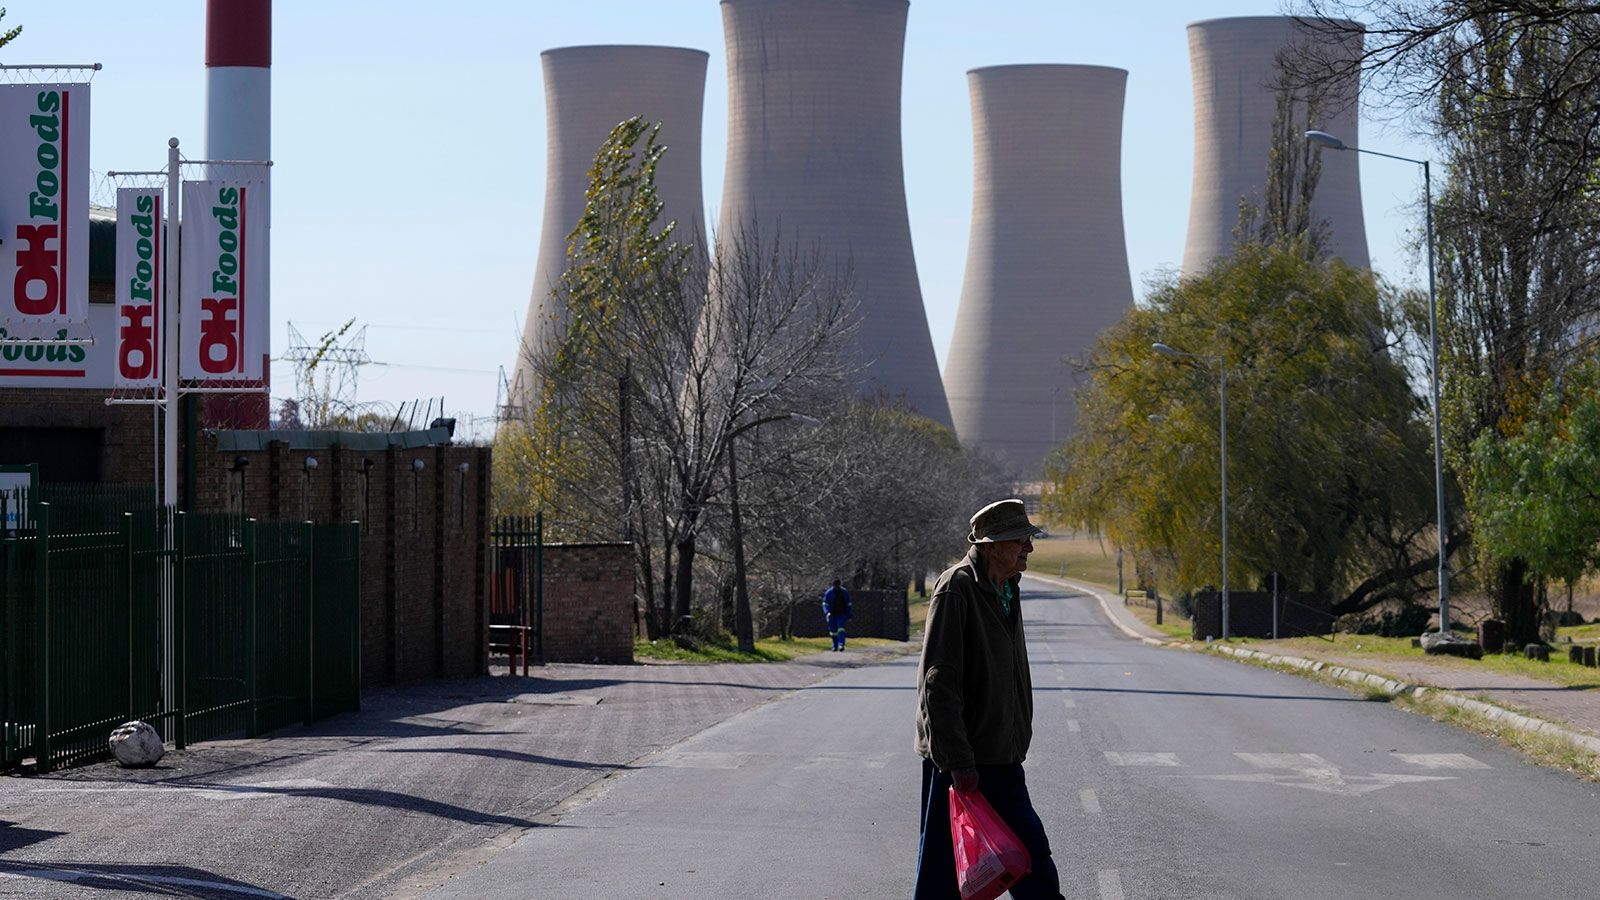 A man walks across from a grocery shop at Komati Power Station in Middelburg, South Africa